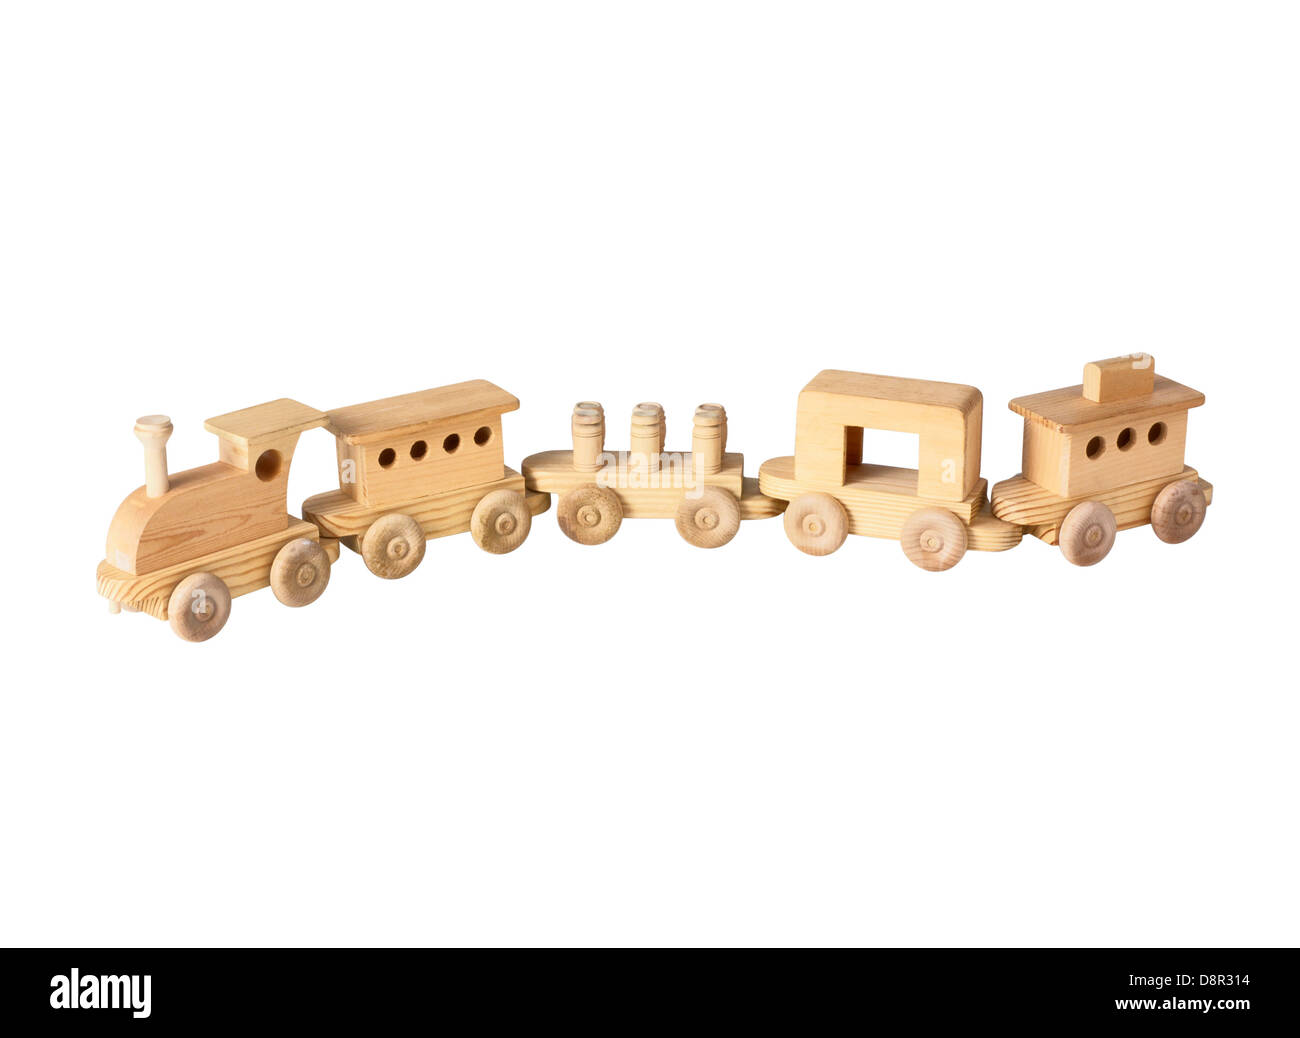 Toy trains made of wood Stock Photo